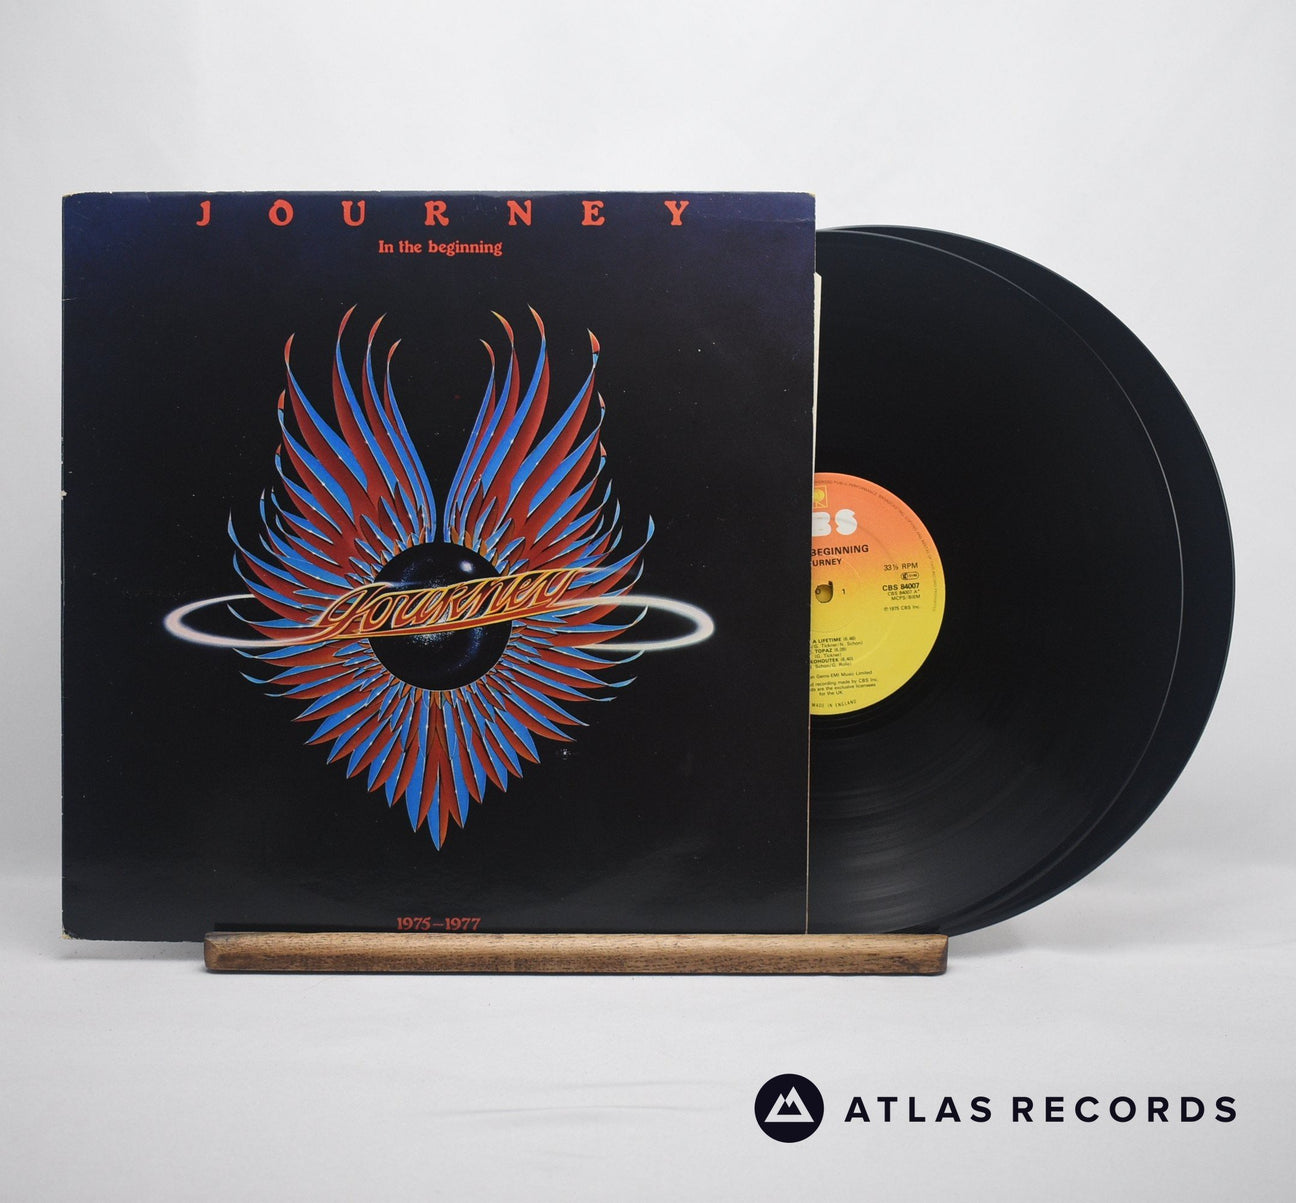 Journey In The Beginning - 1975-1977 Double LP Vinyl Record - Front Cover & Record